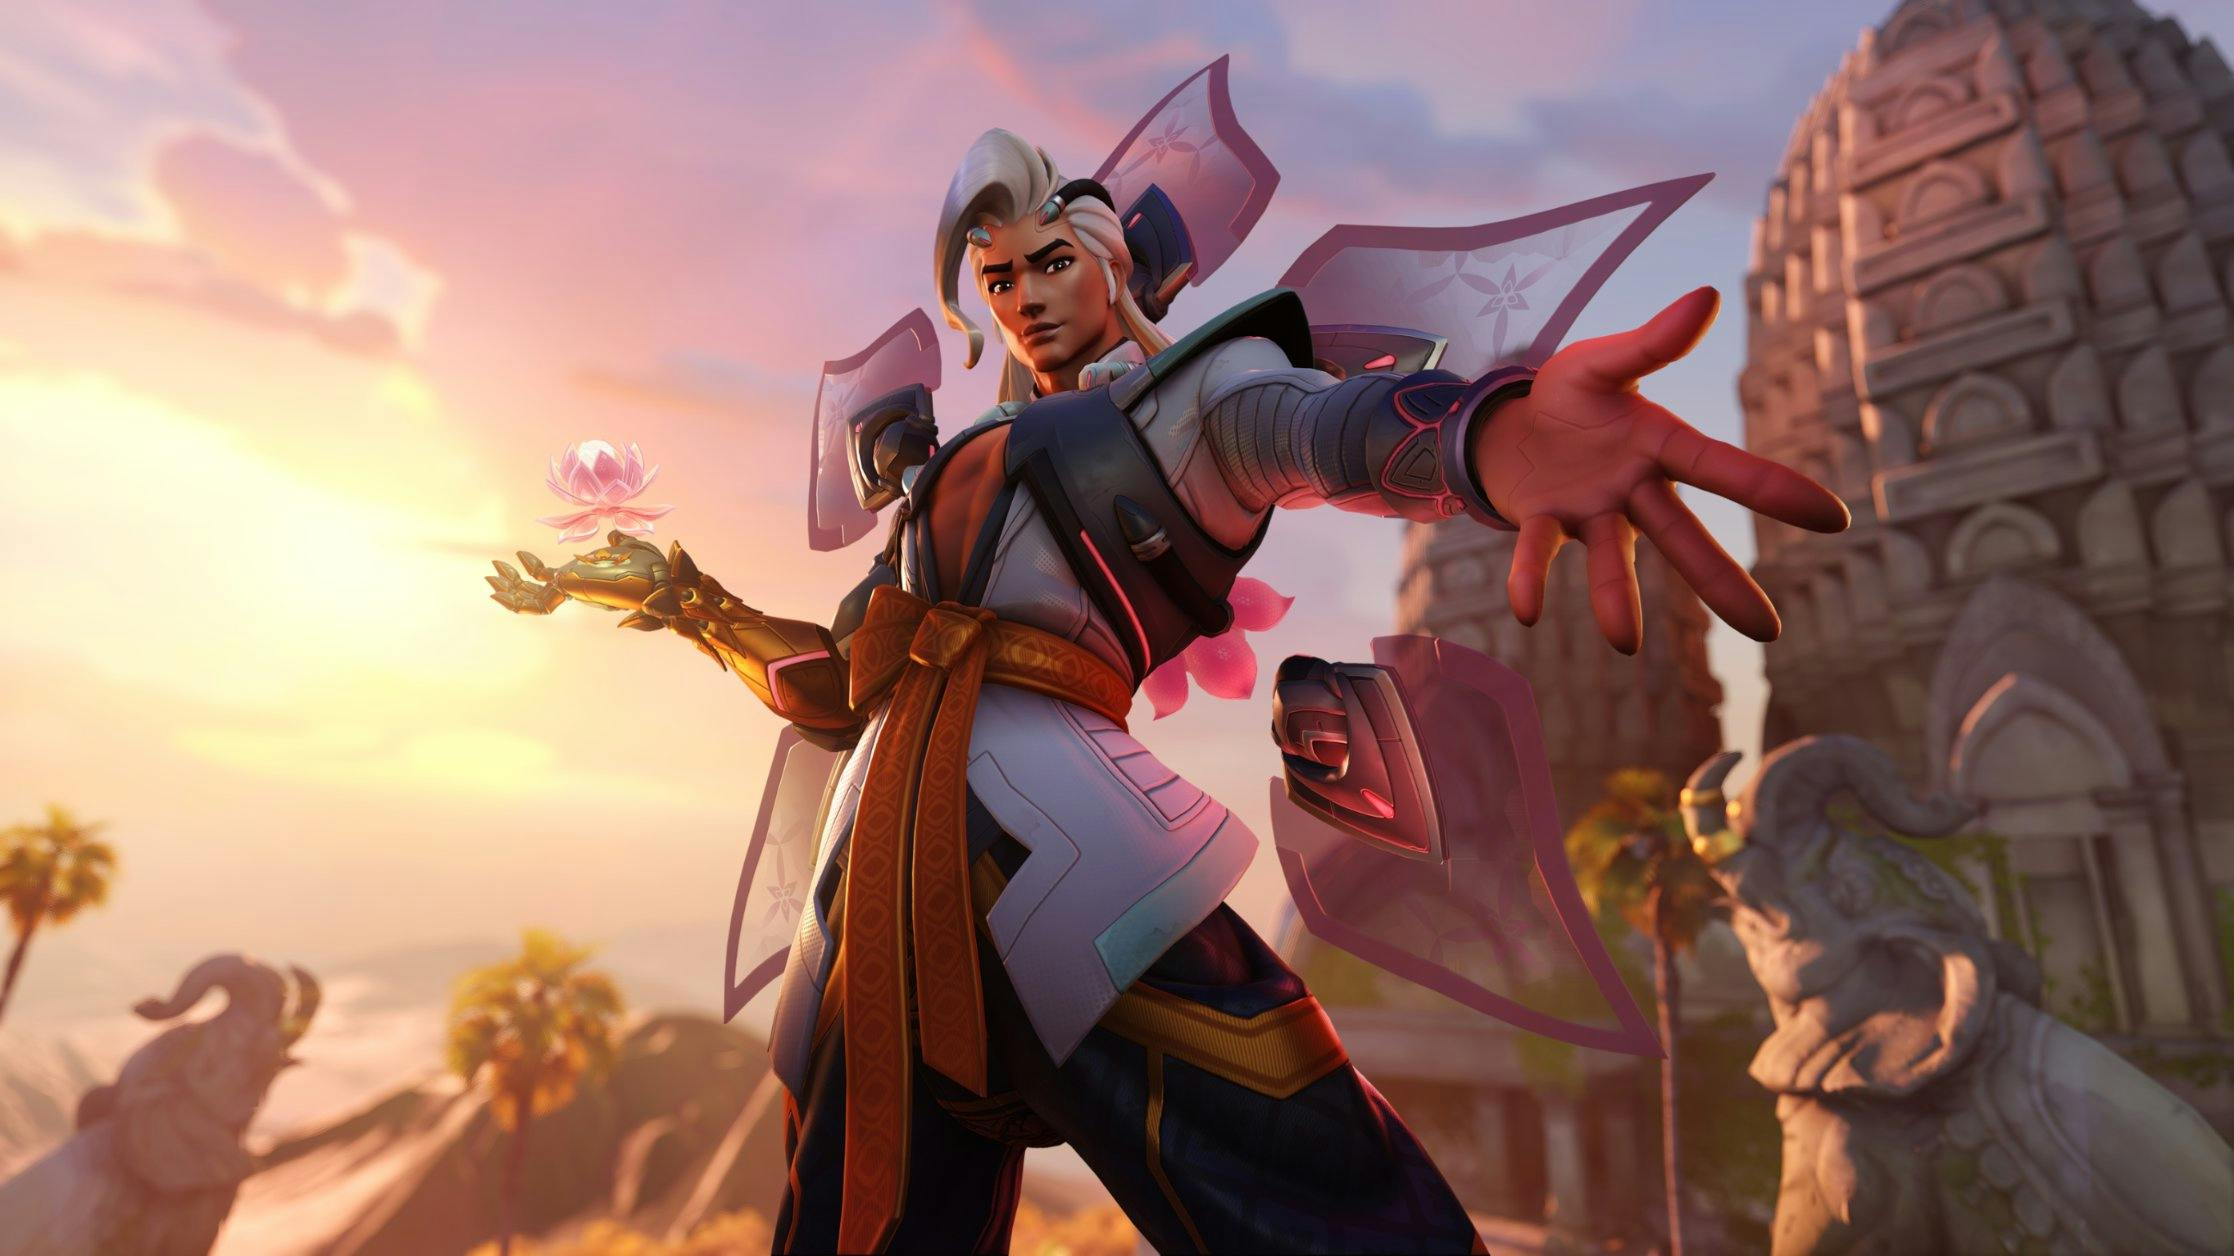 Blossoming Power: New support hero ‘Lifeweaver’ coming to Overwatch 2 in Season 4